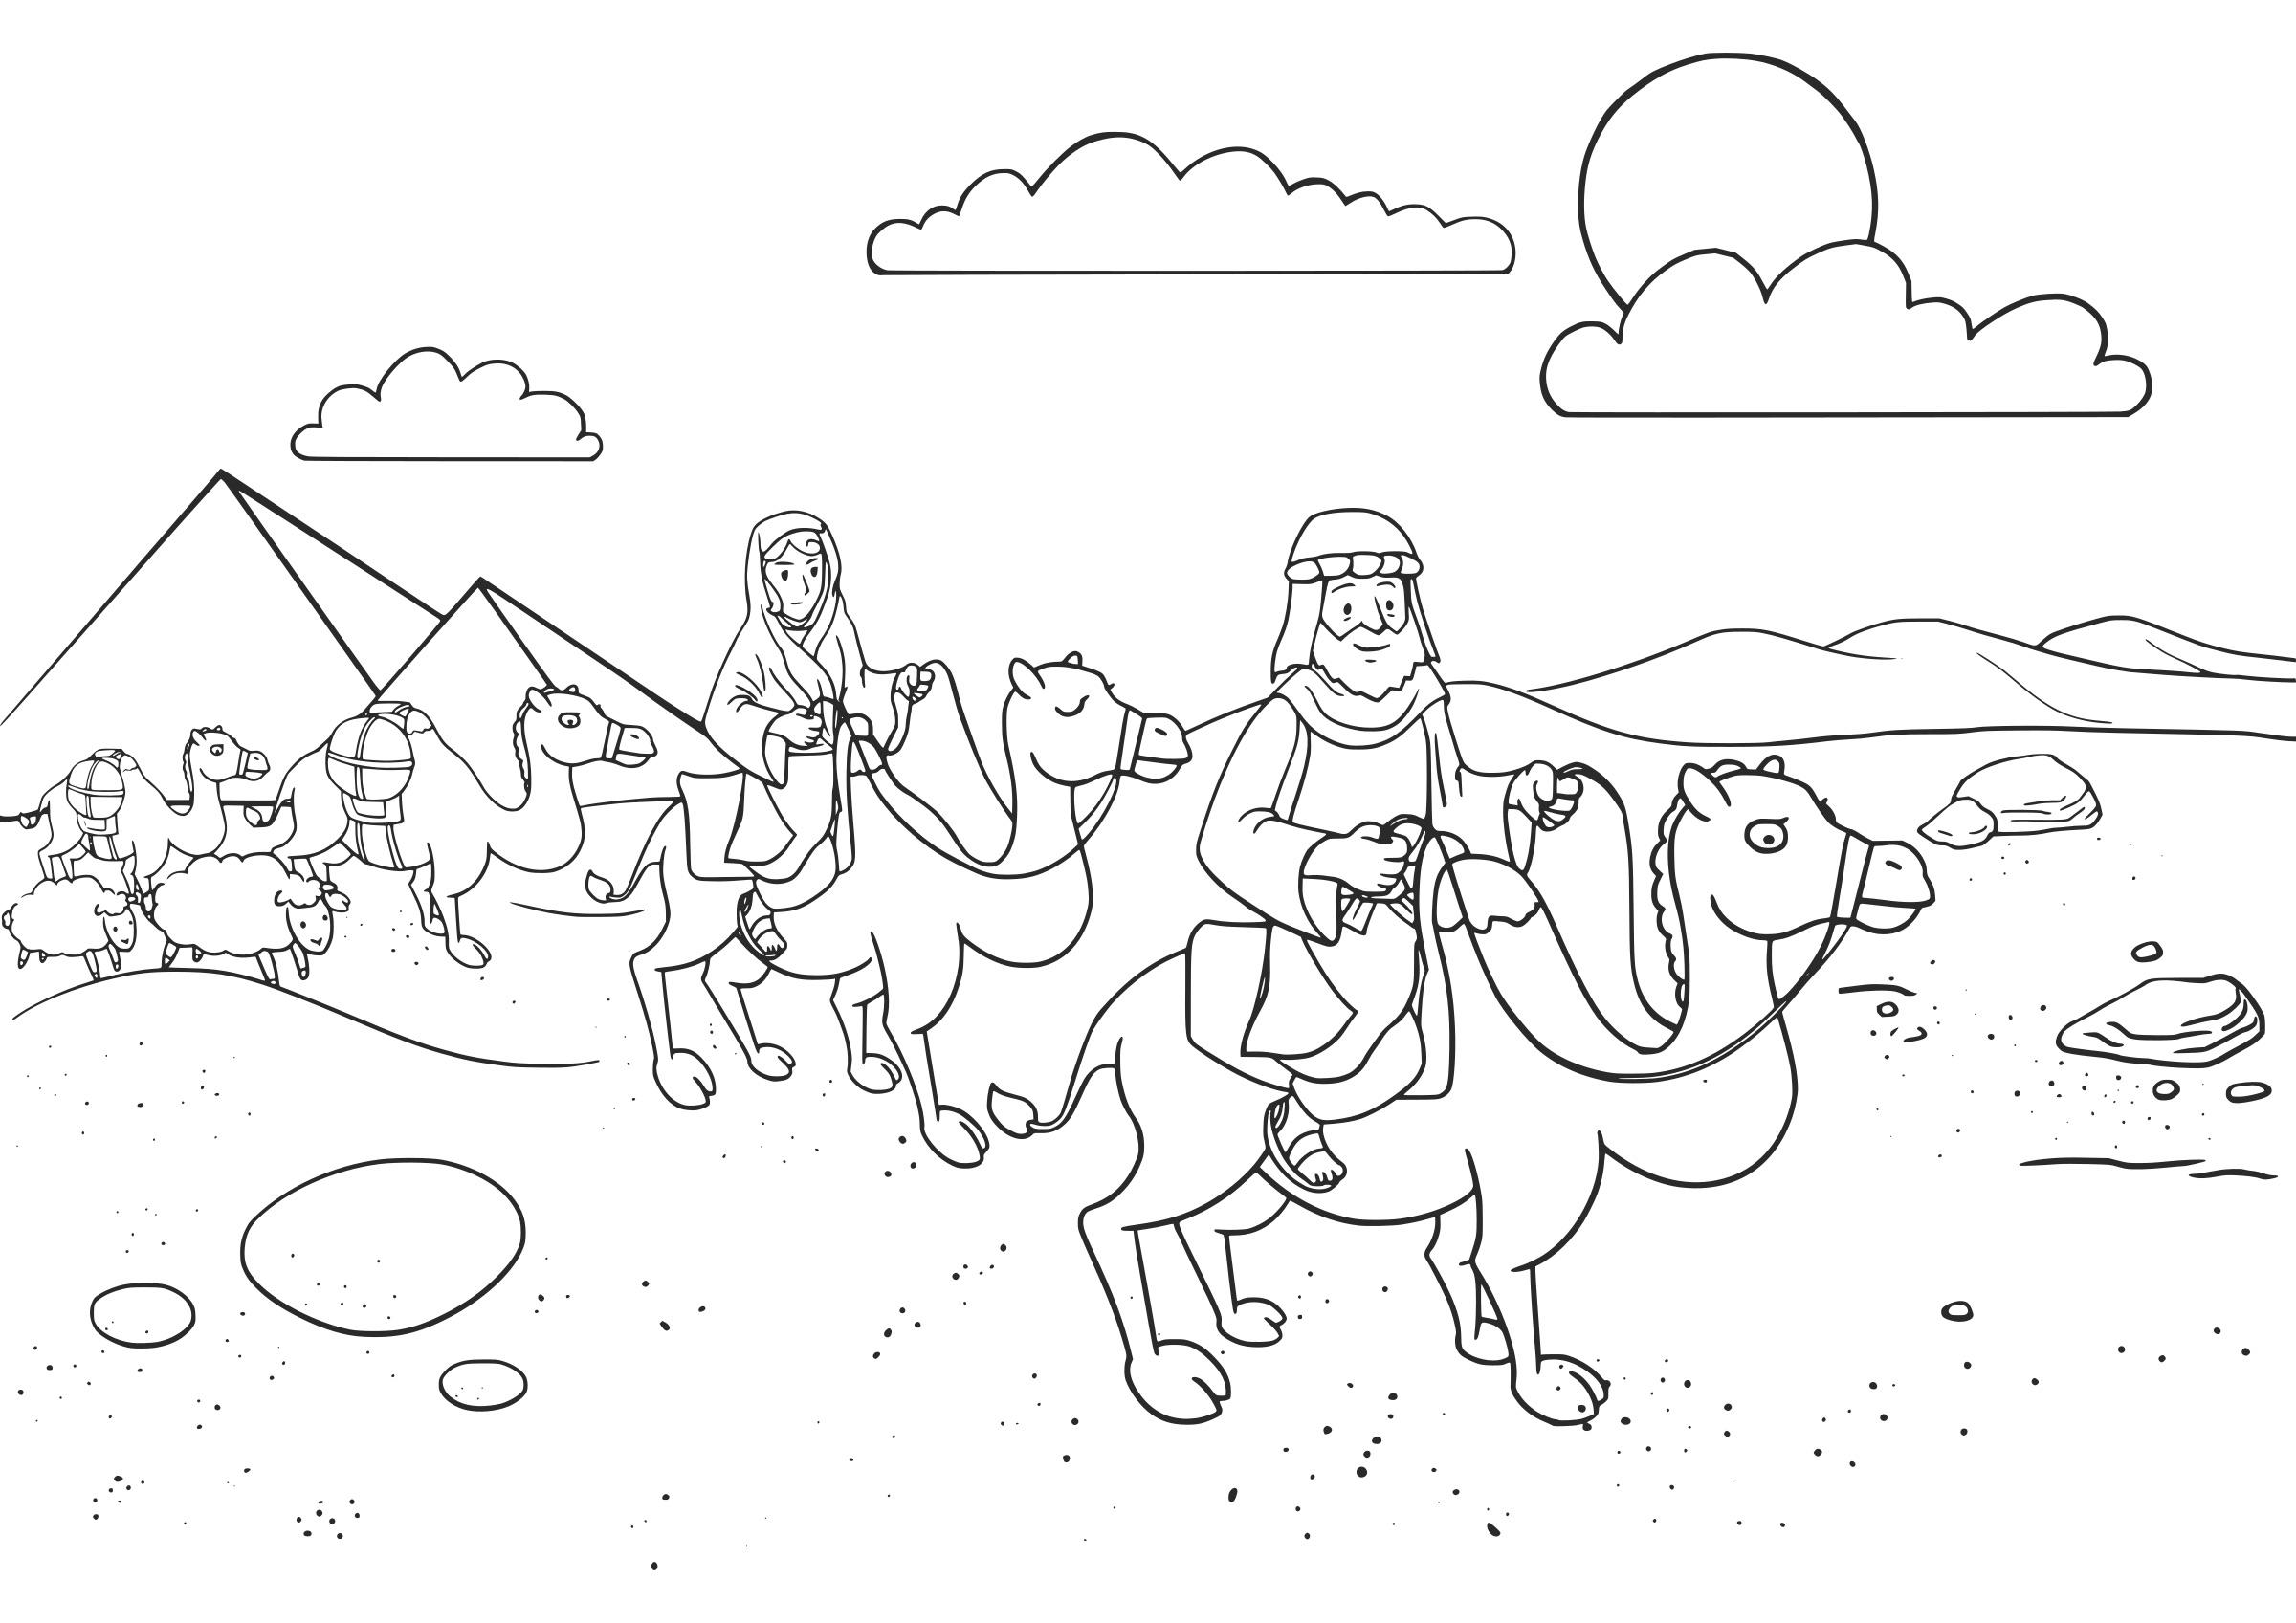 Exodus colouring pages can range from family friendly and fun to wtf rexjew